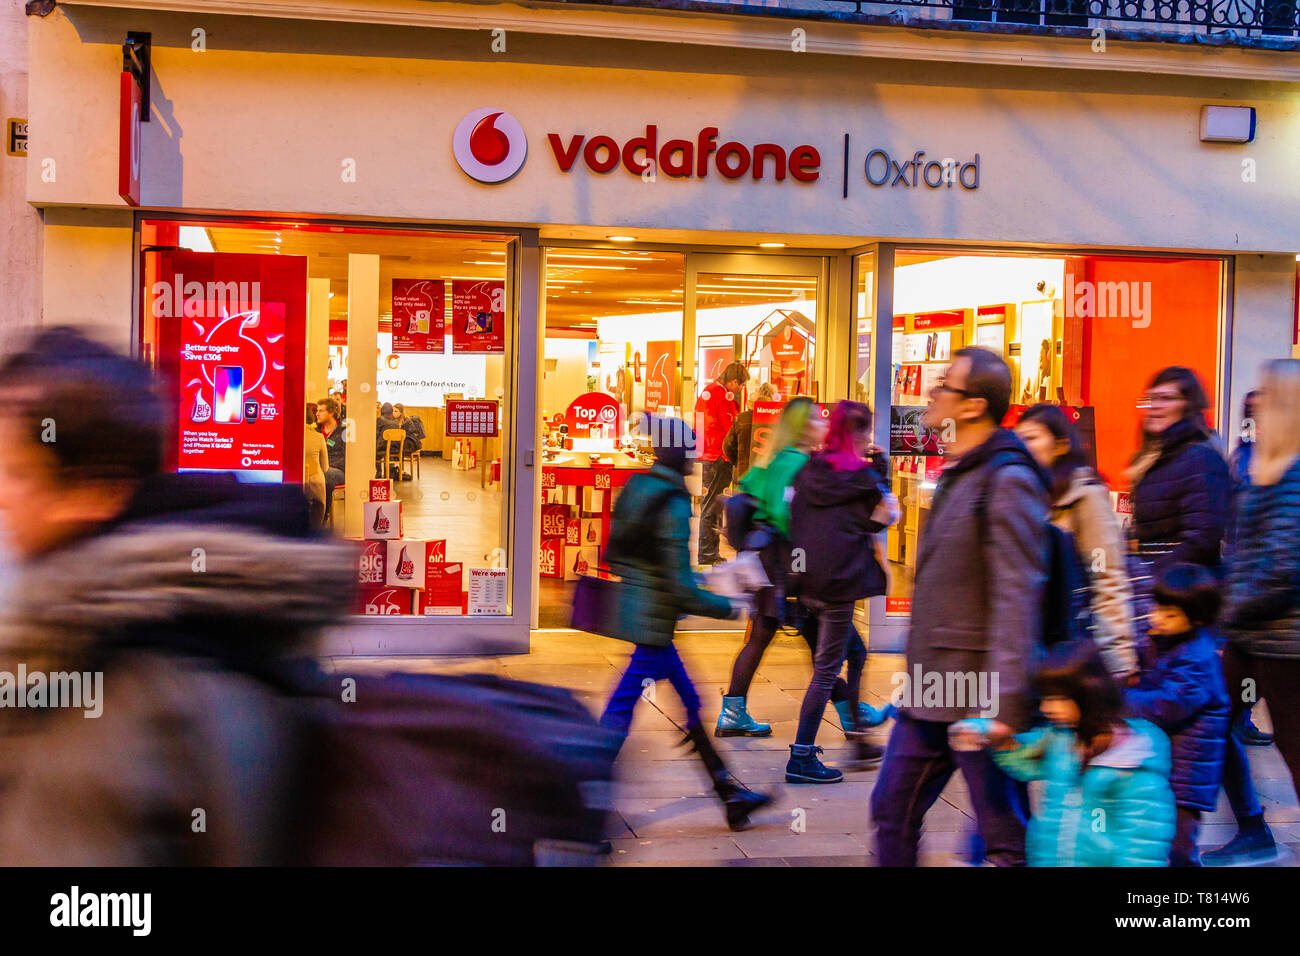 People passing a Vodafone shop front in Oxford, UK. December 2018. Stock Photo